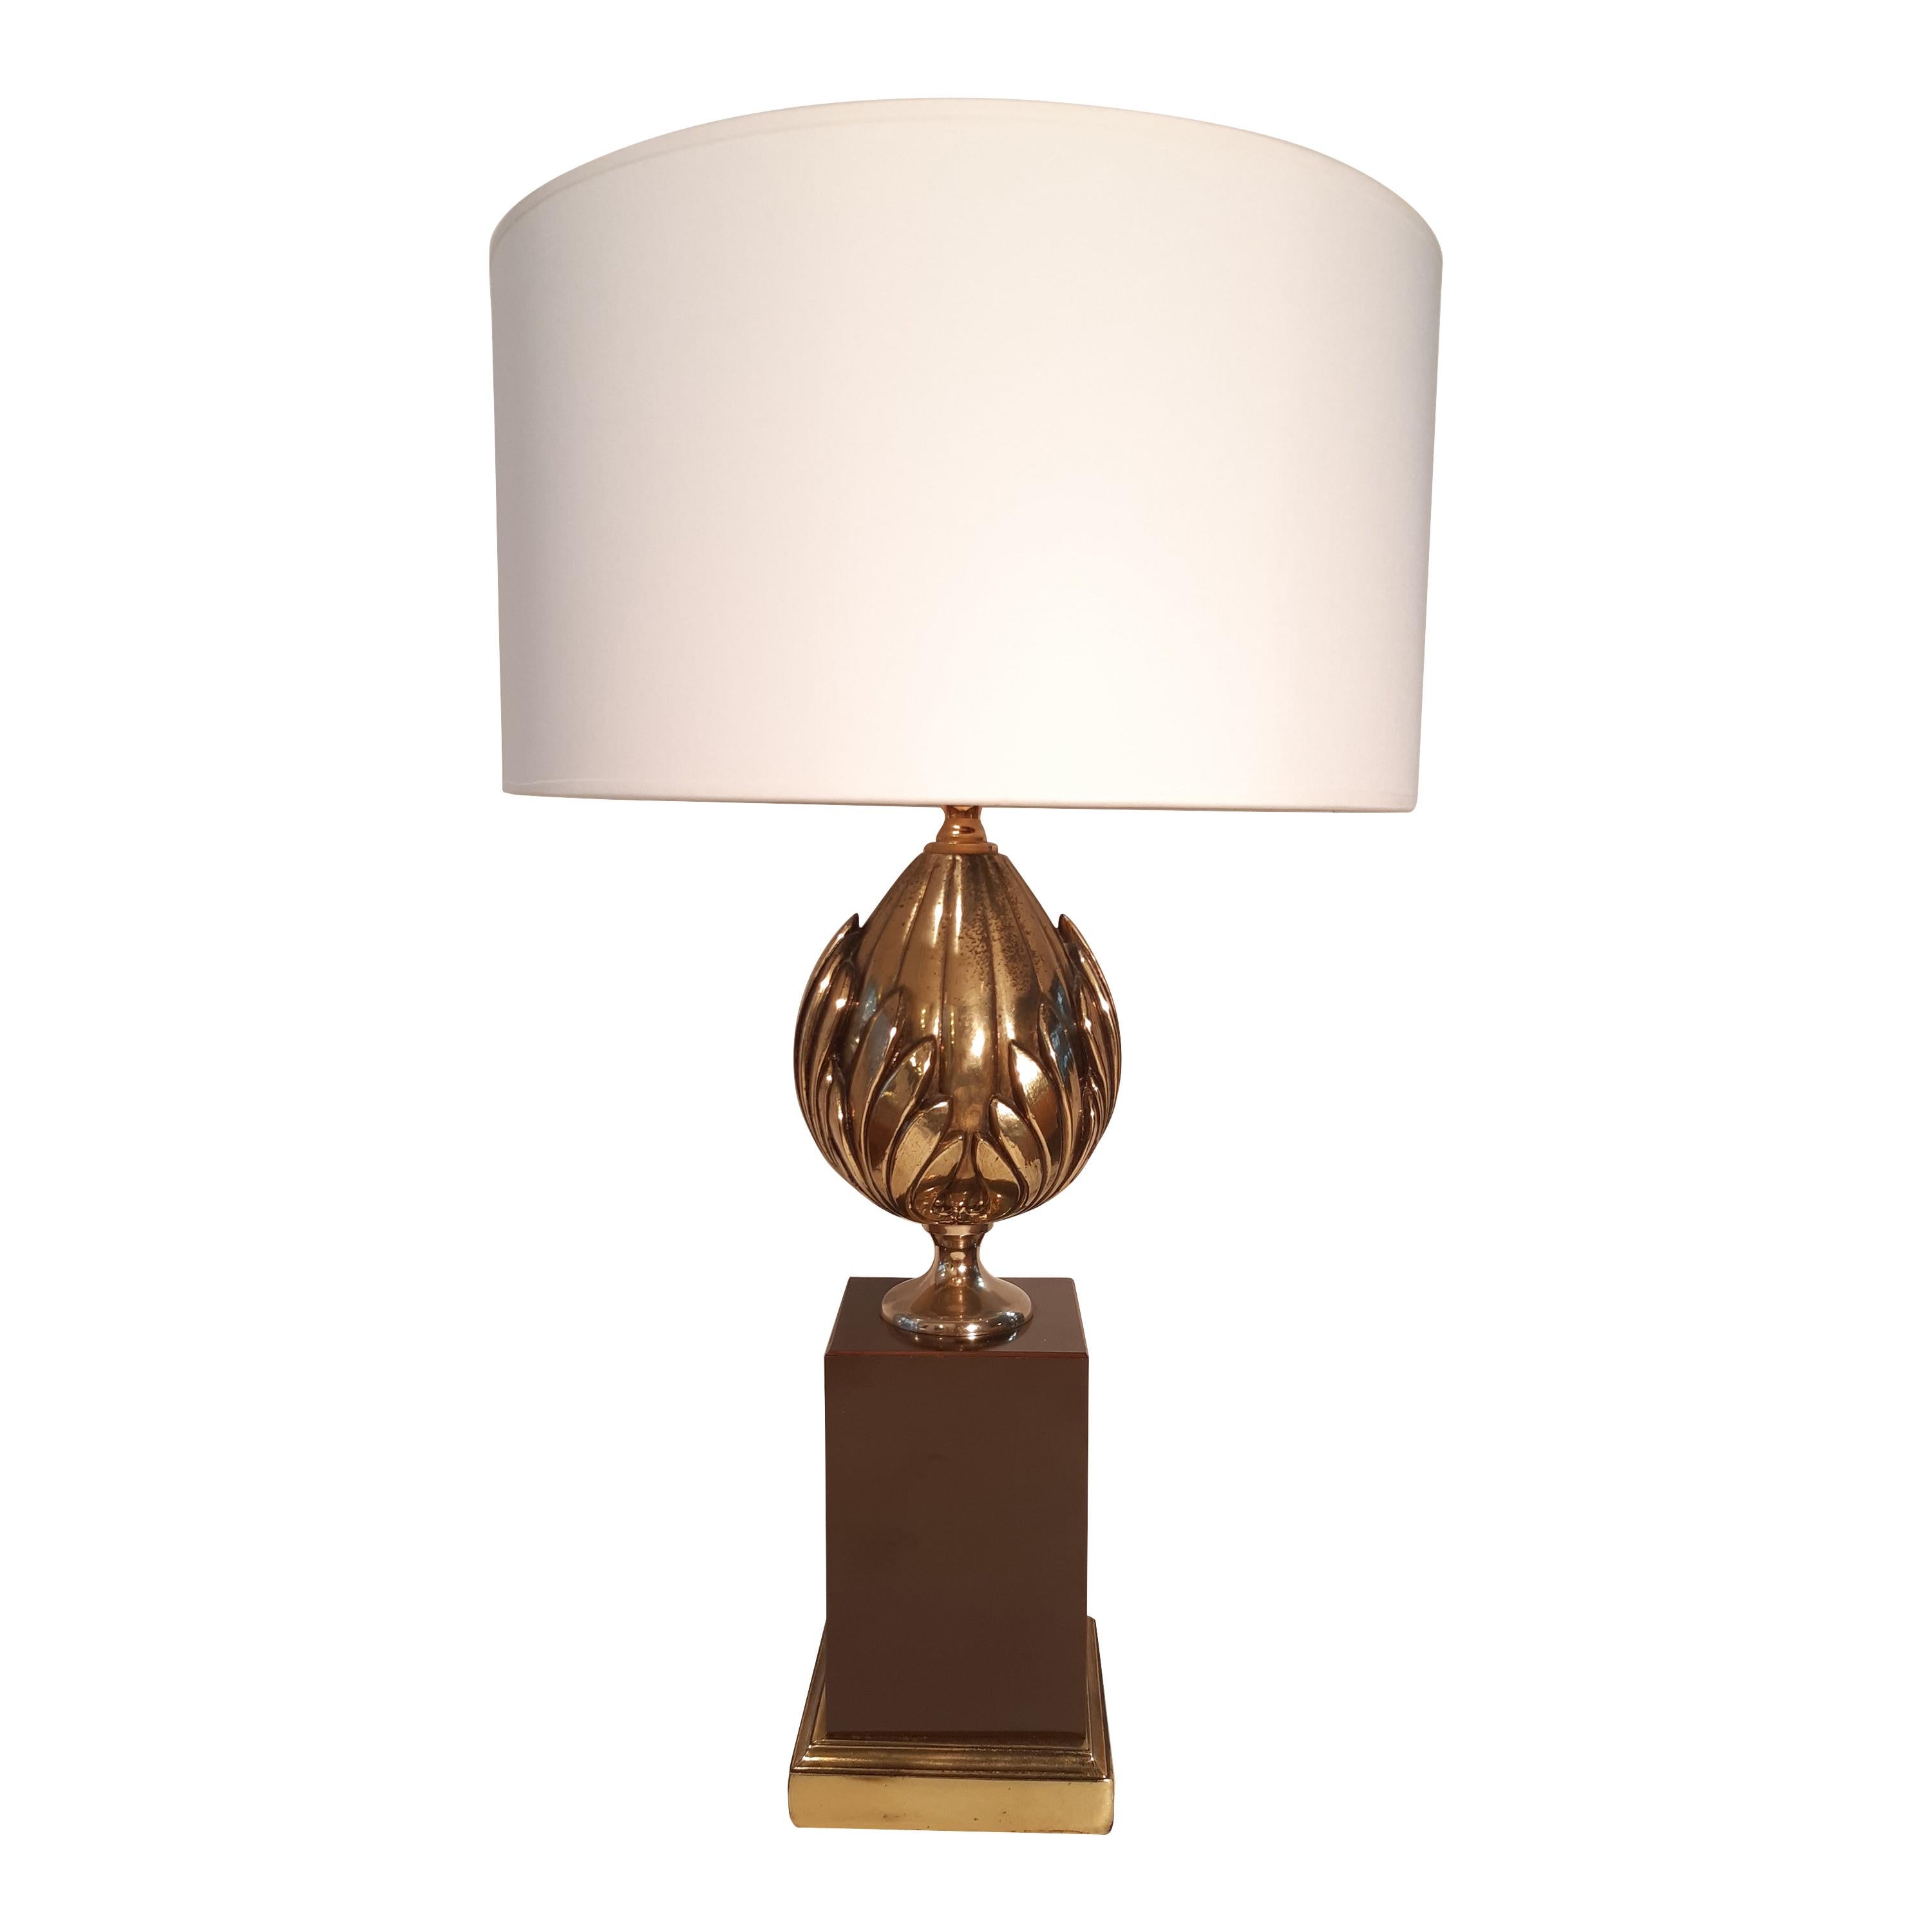 1970 French Midcentury Table Lamp Maison Charles Style For Sale